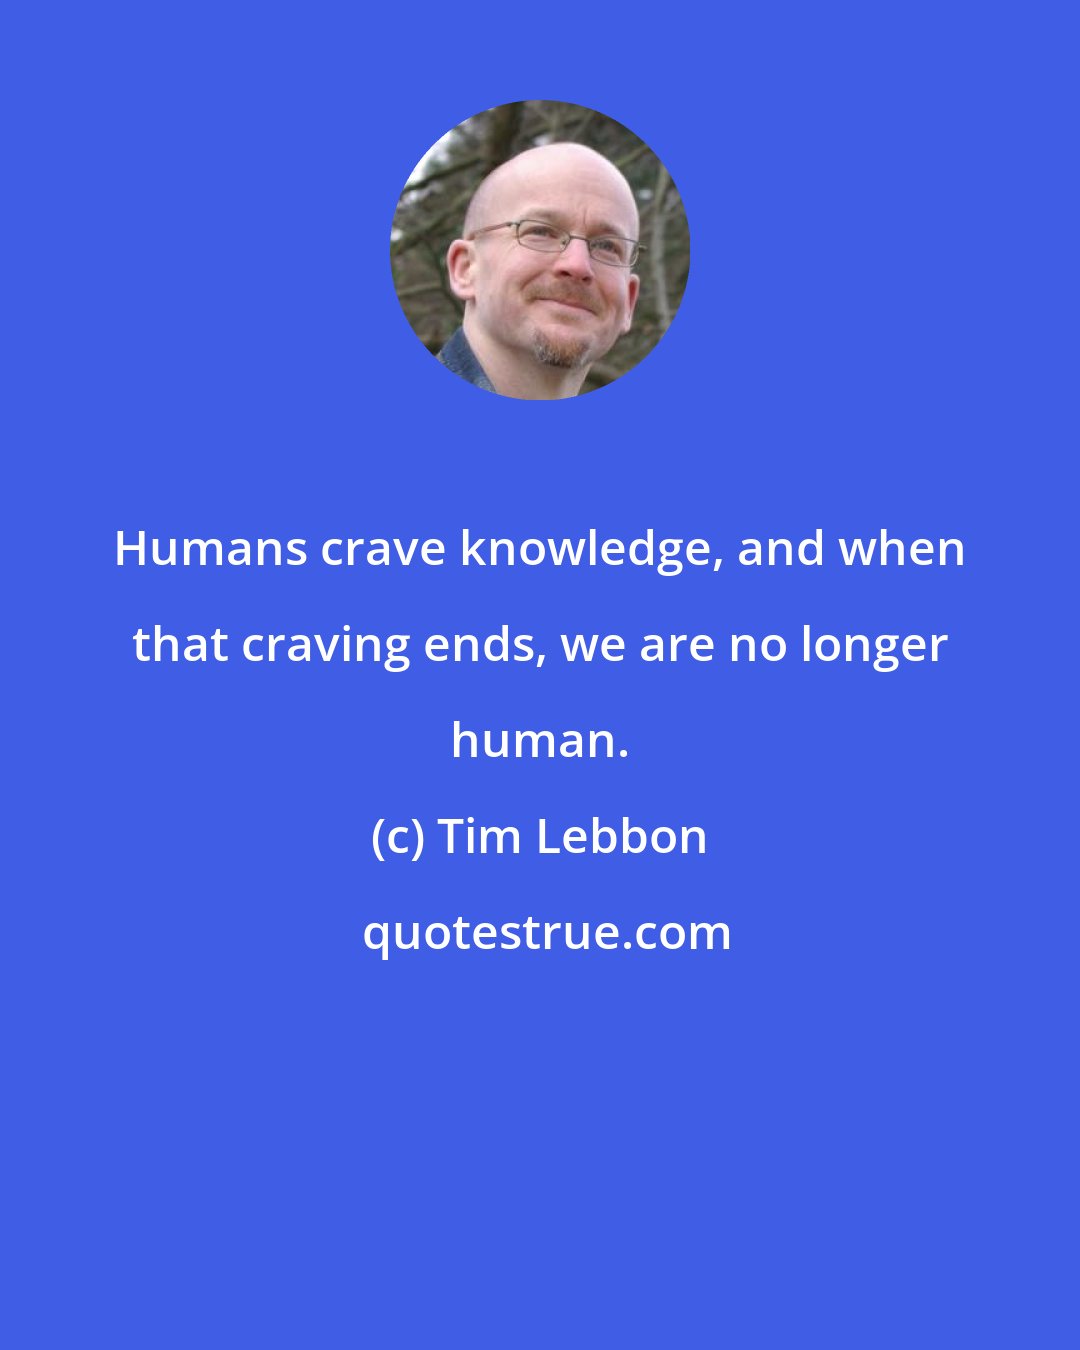 Tim Lebbon: Humans crave knowledge, and when that craving ends, we are no longer human.